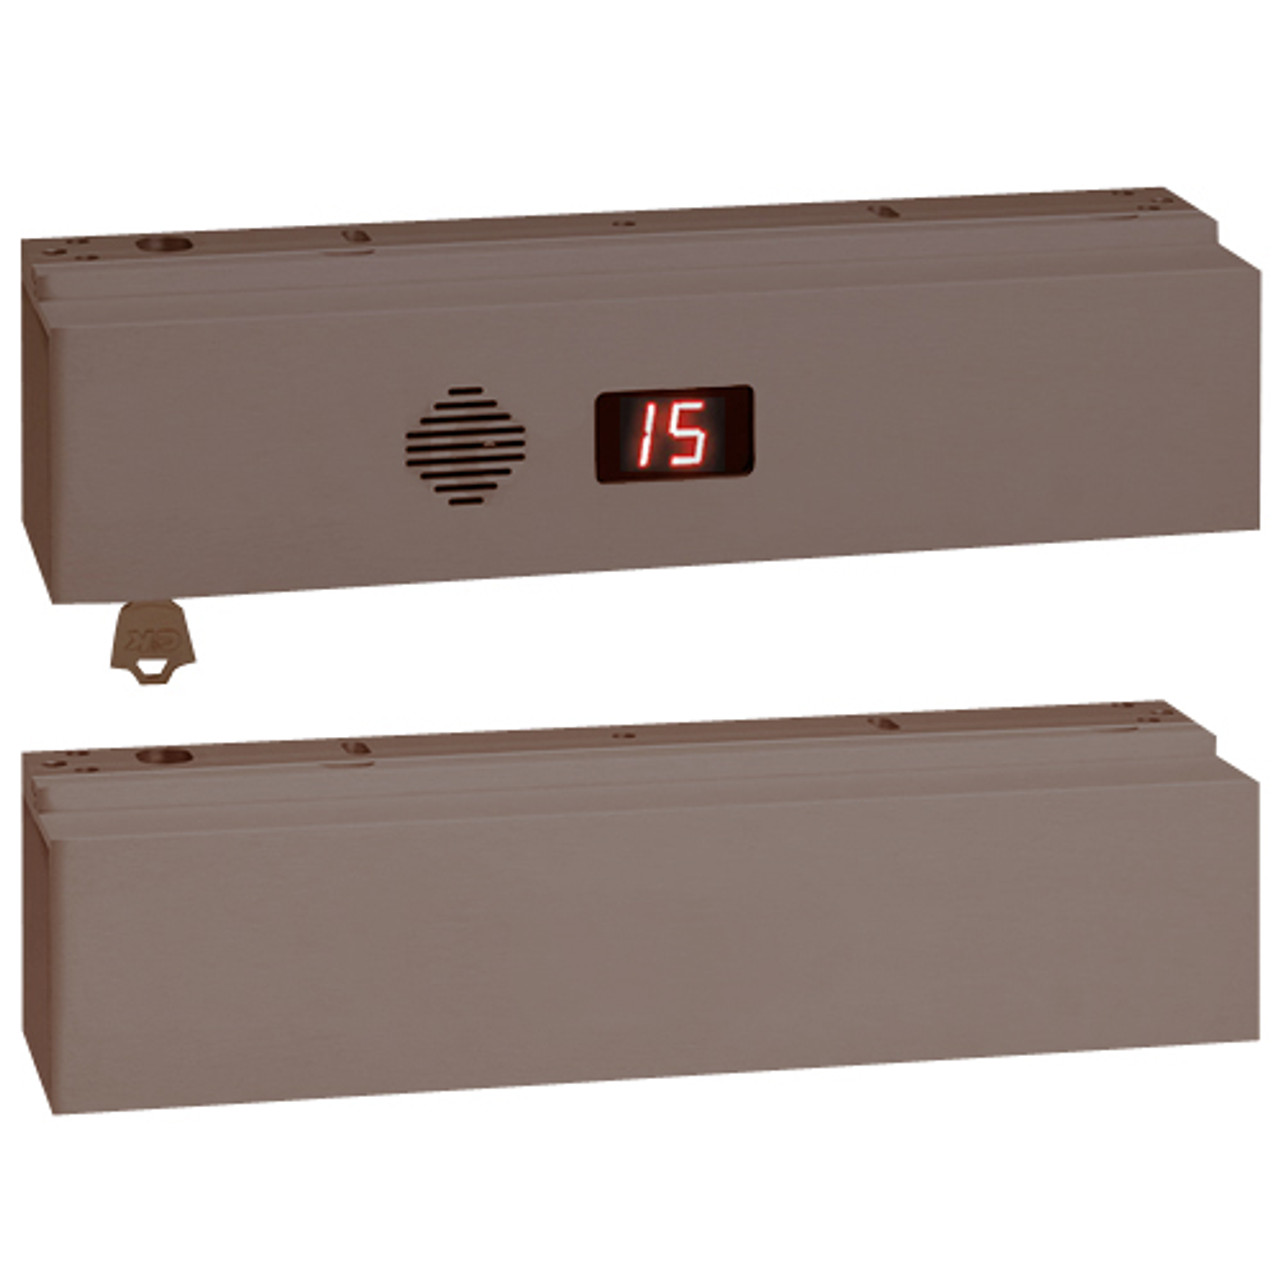 1511T-NC-K-X-B2A2 SDC 1511T Series Tandem Integrated Delayed Egress Locks with Magnetic Bond Sensor and Anti-Tamper Switch in Dark Bronze